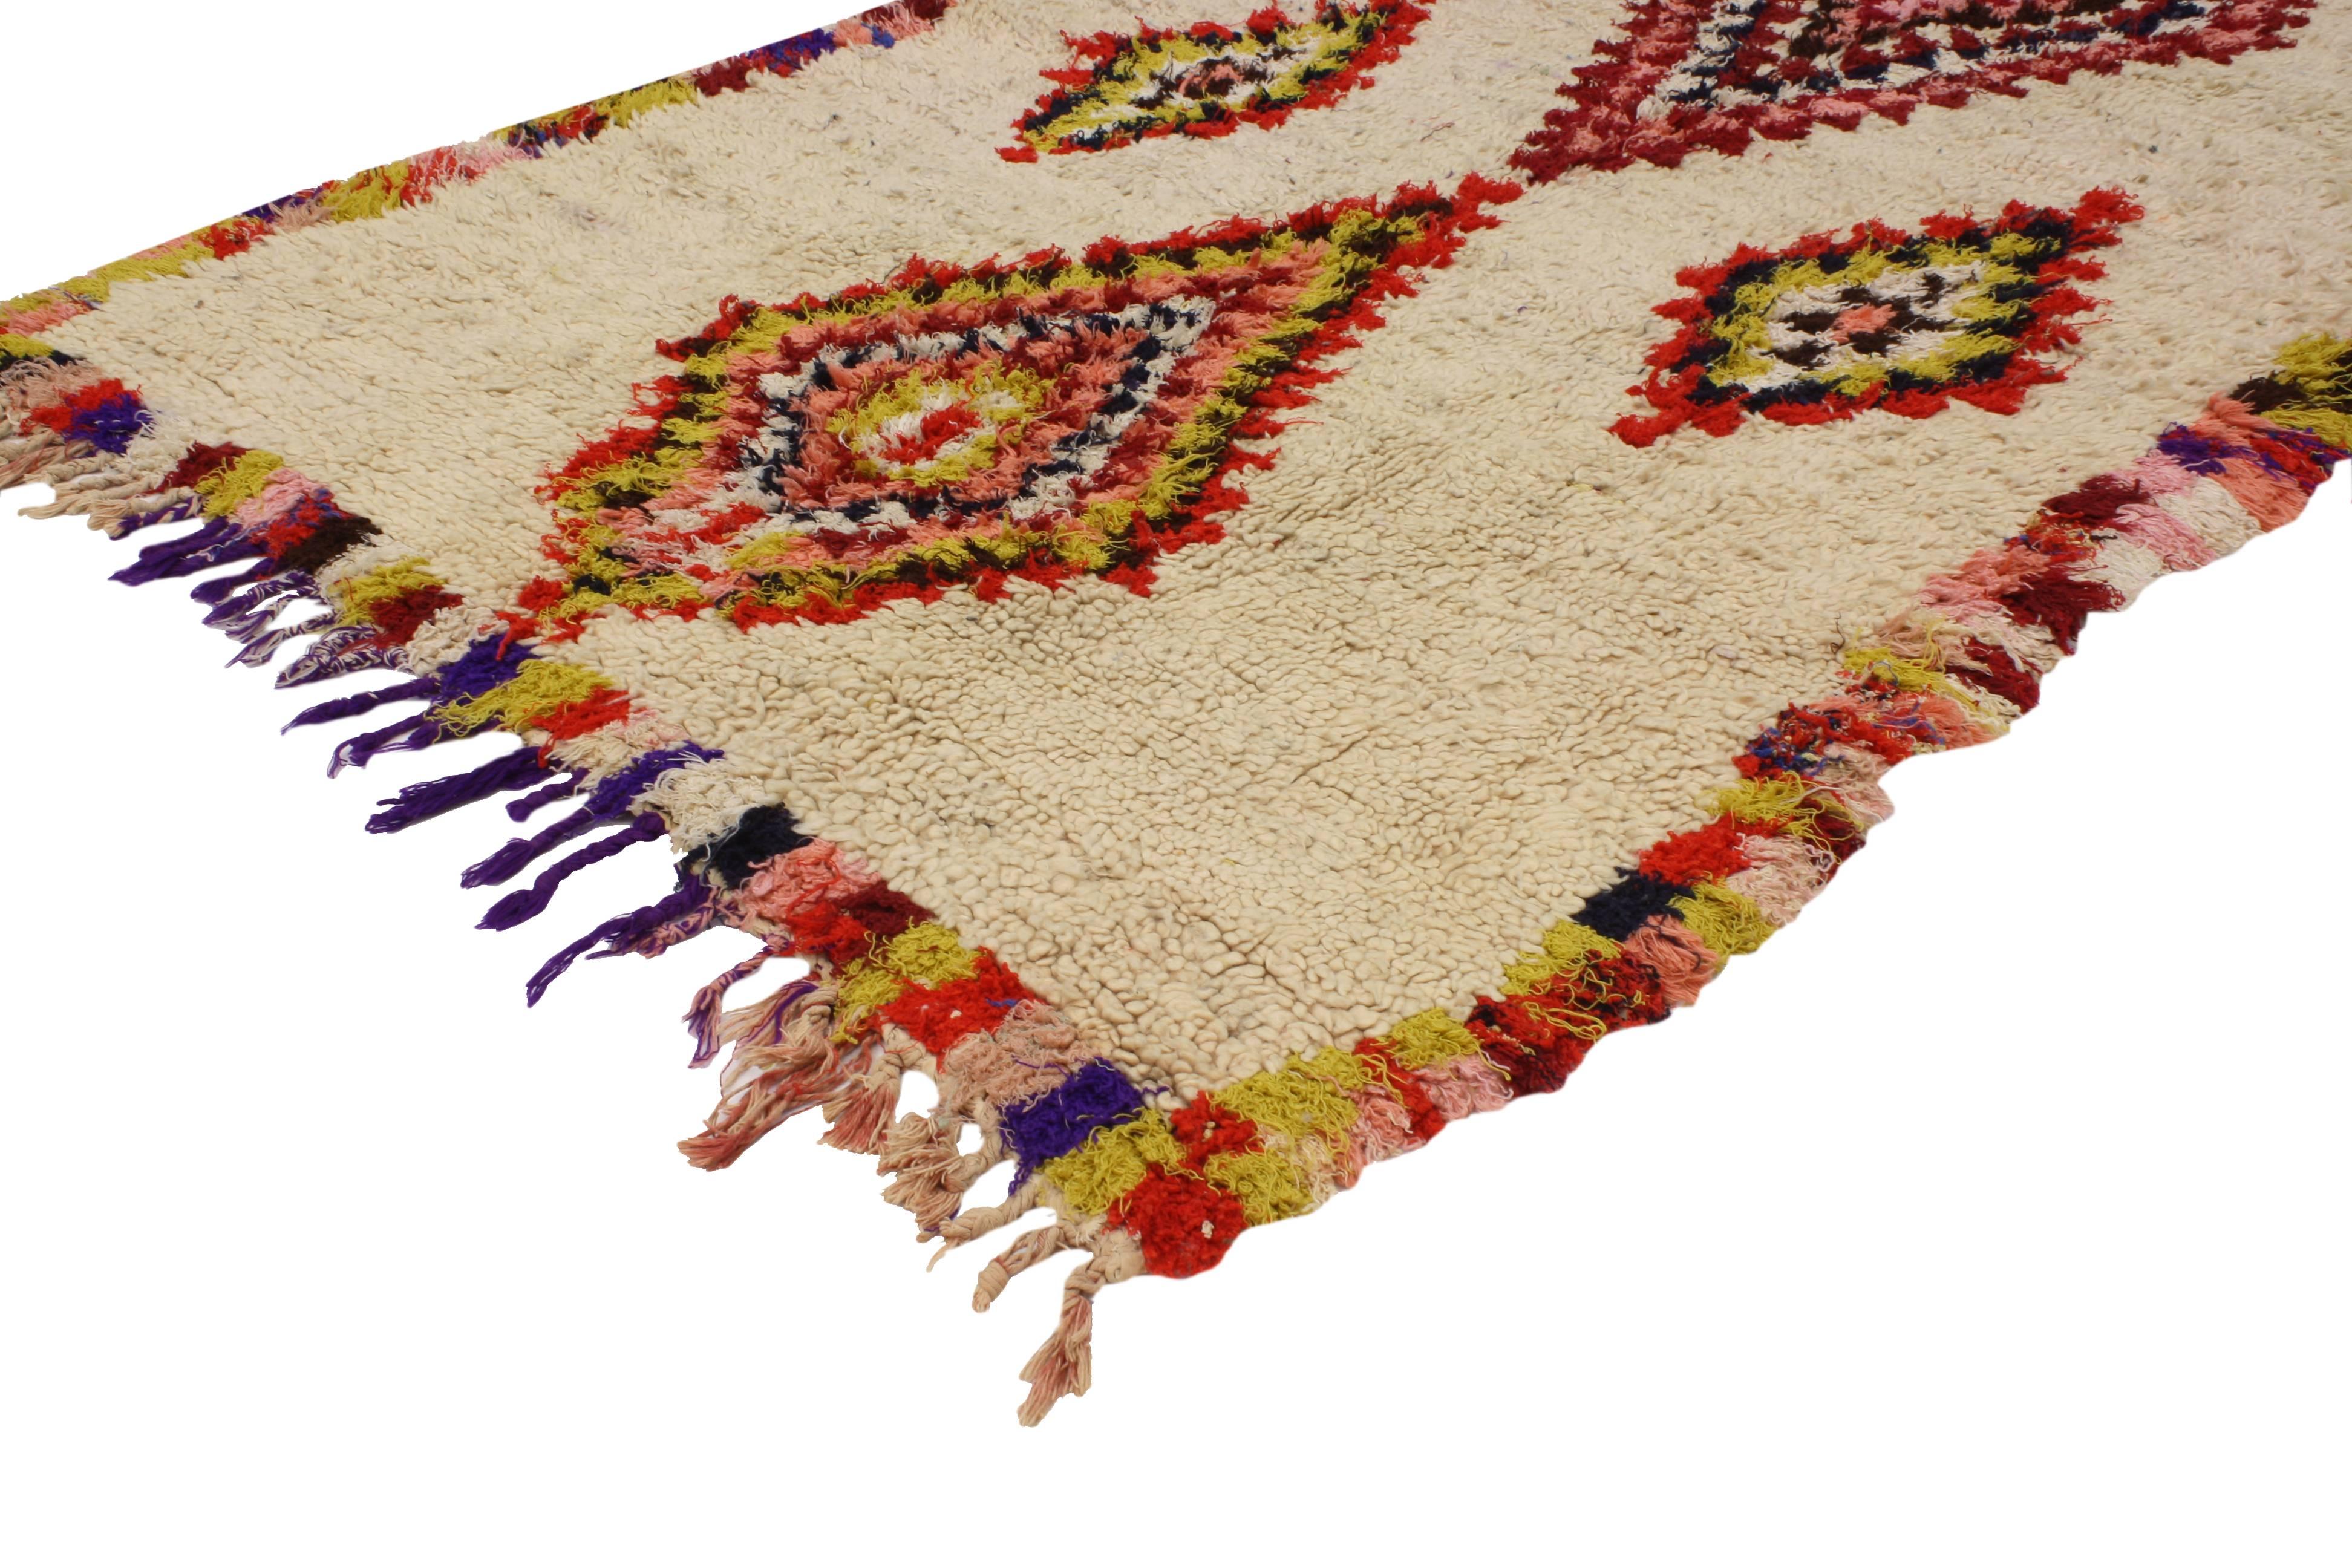 20491 Vintage Berber Moroccan Azilal Rug with Boho Chic Tribal Style and Hygge Vibes 04’00 x 06’08.  This hand-knotted wool vintage Moroccan Azilal rug with Bohemian style features two large-scale stacked diamonds flanked with two smaller scale